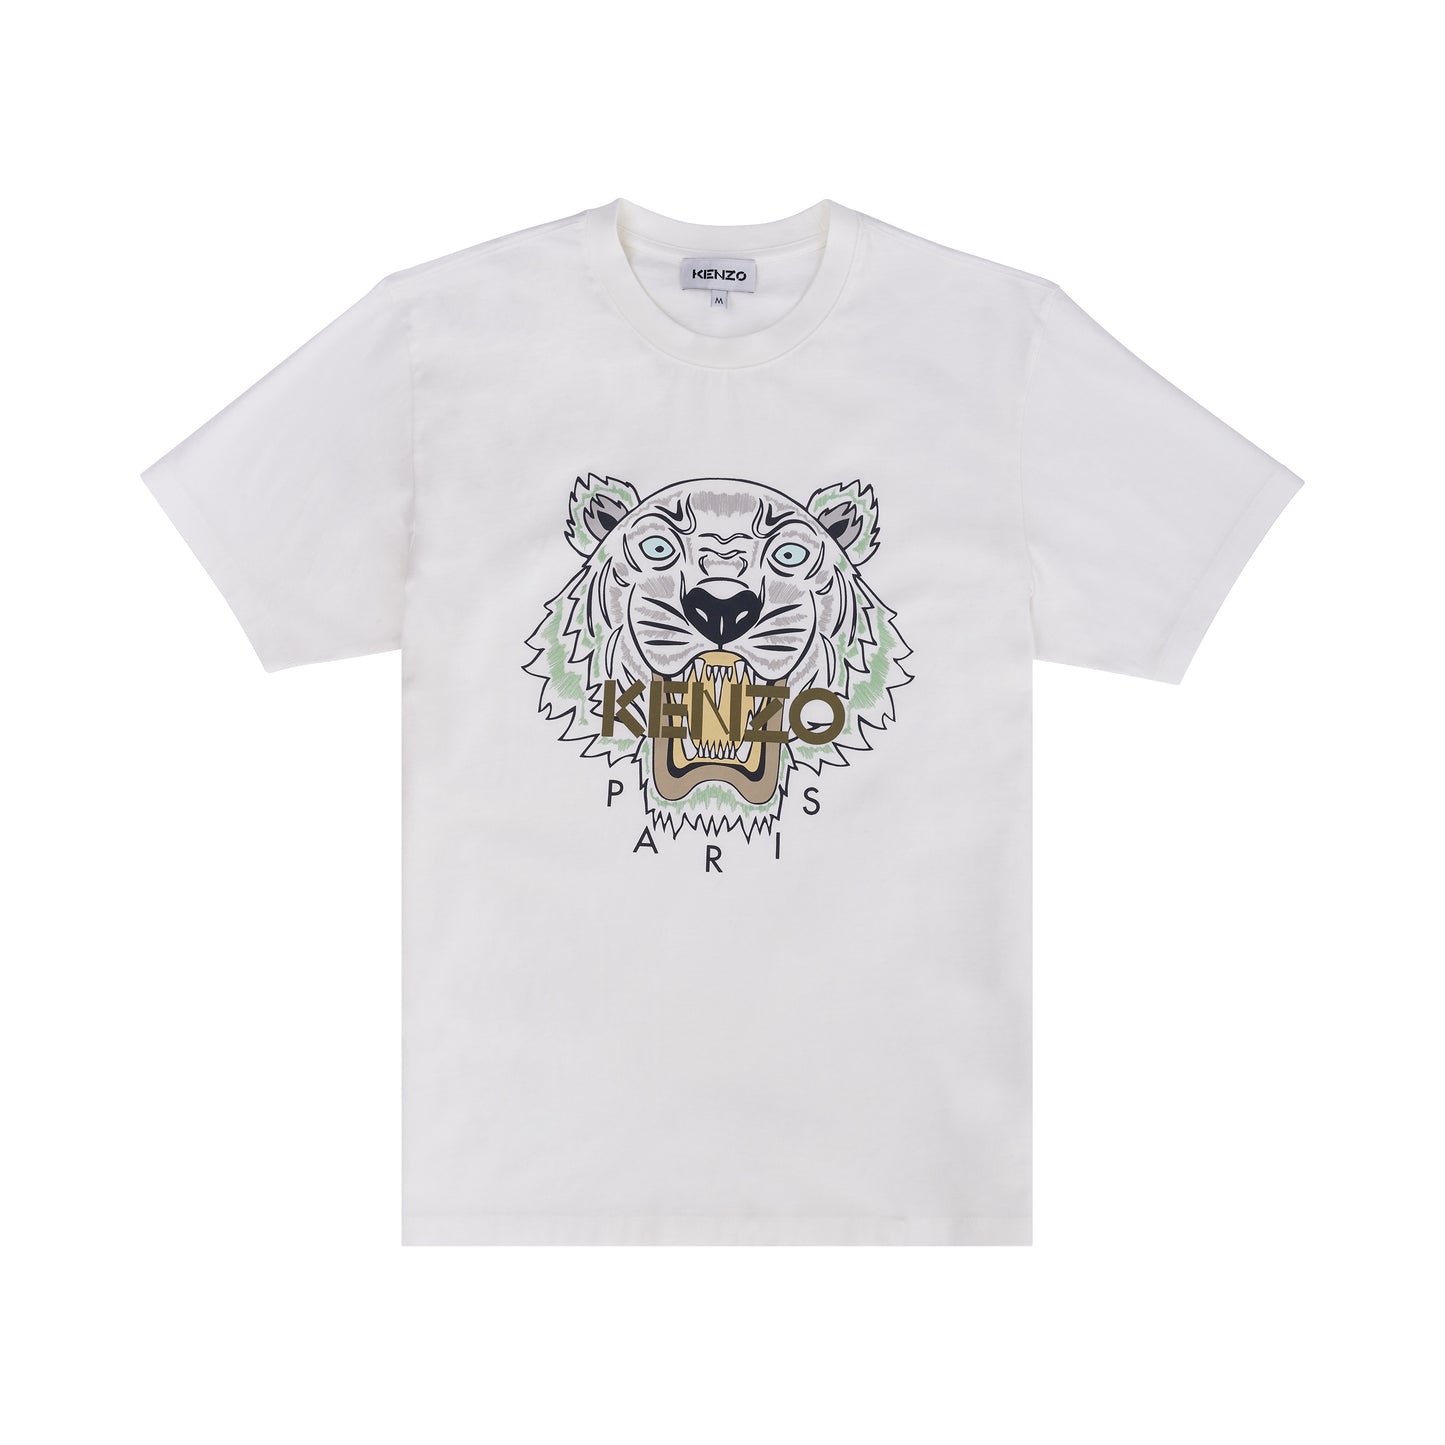 Iconic Tiger T-Shirt in White